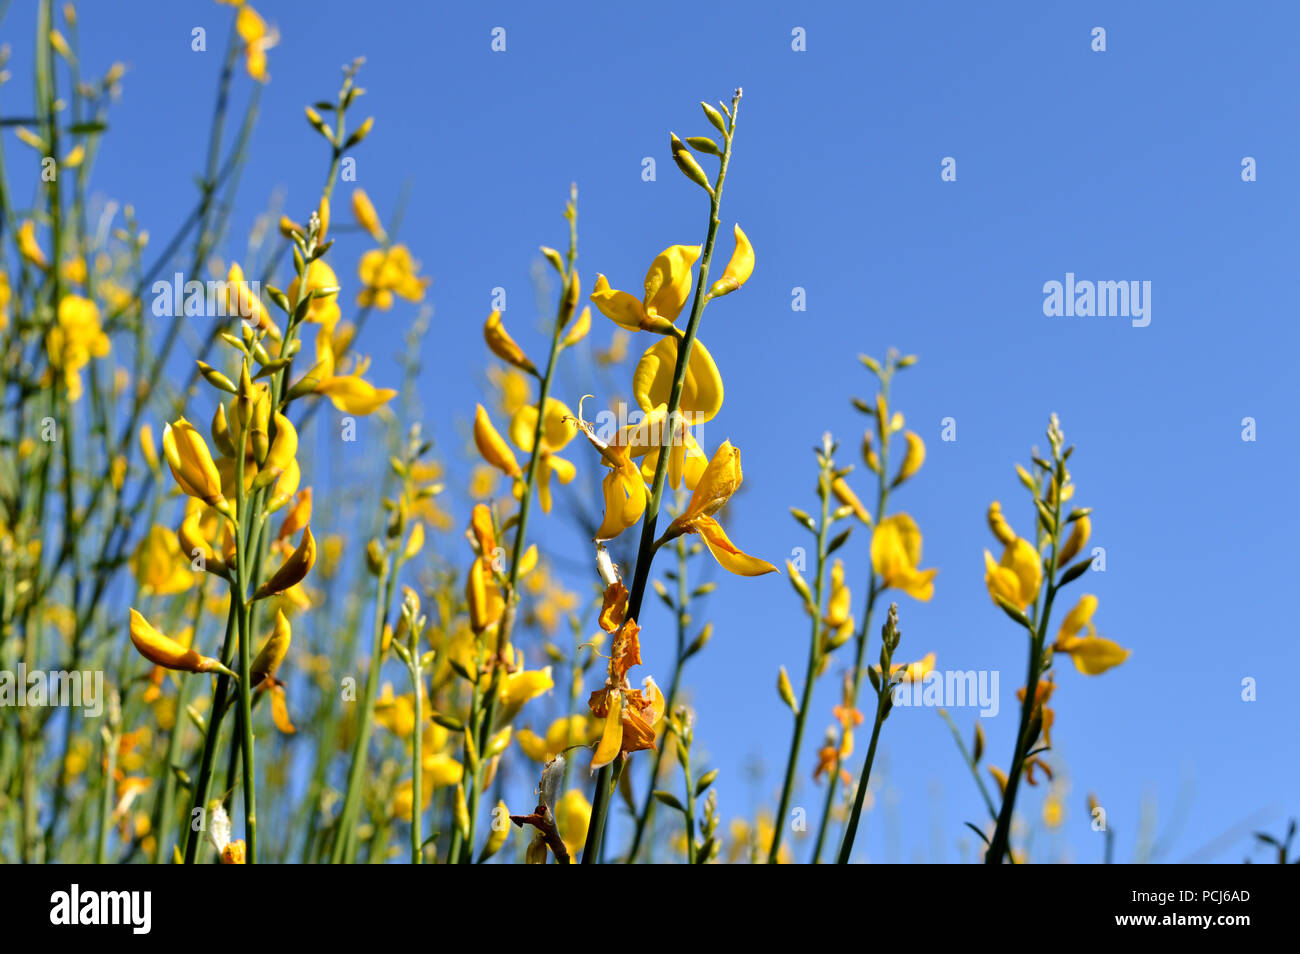 Close-up of Genisteae Bush in Bloom, Yellow Broom, Nature Stock Photo